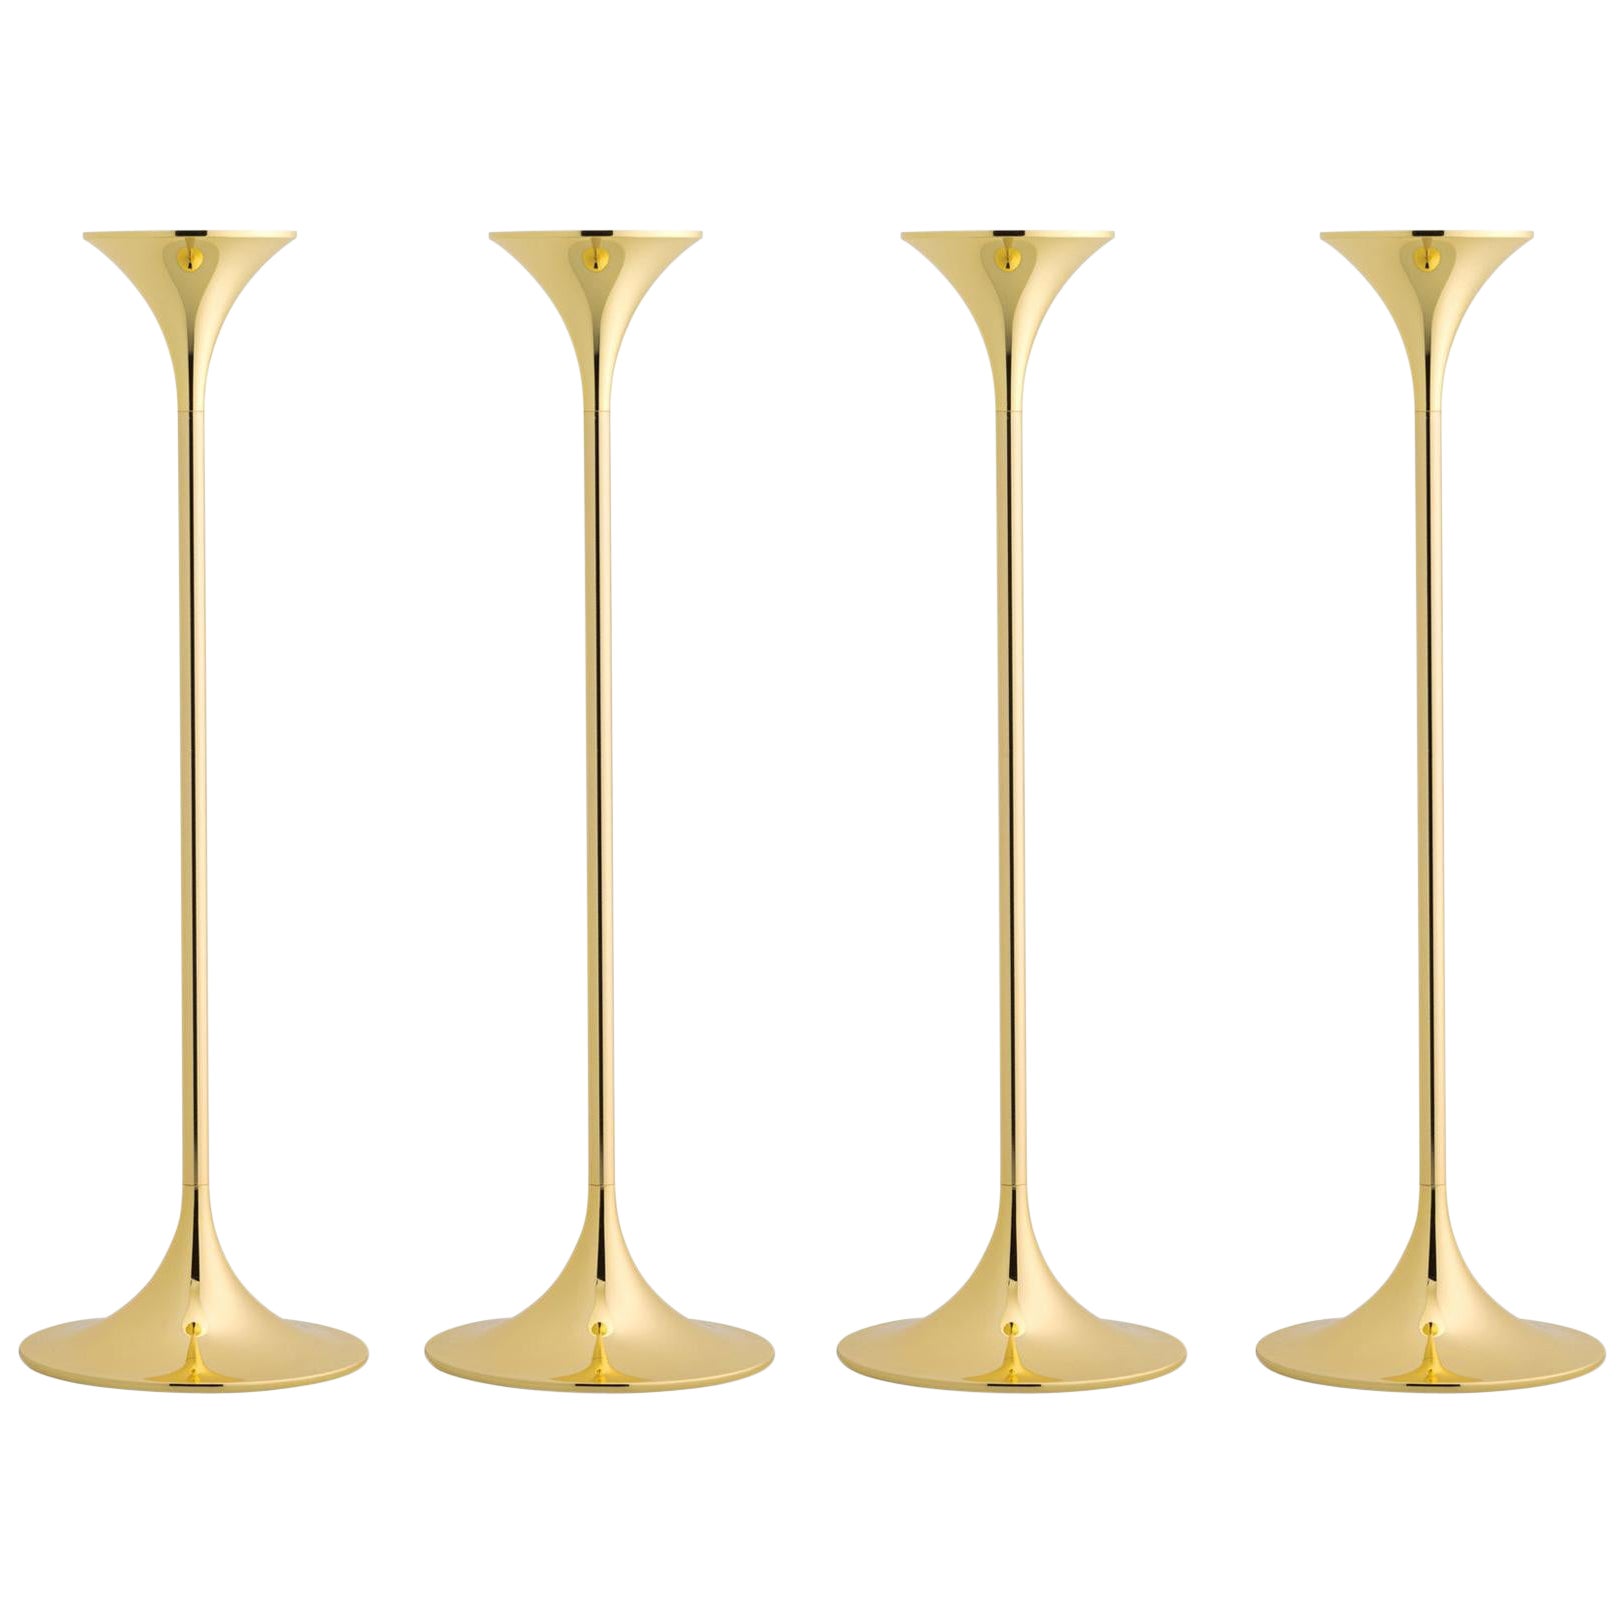 Set of Four Max Brüel 'Jazz' Candleholders, Steel with Brass Plating by Karakter